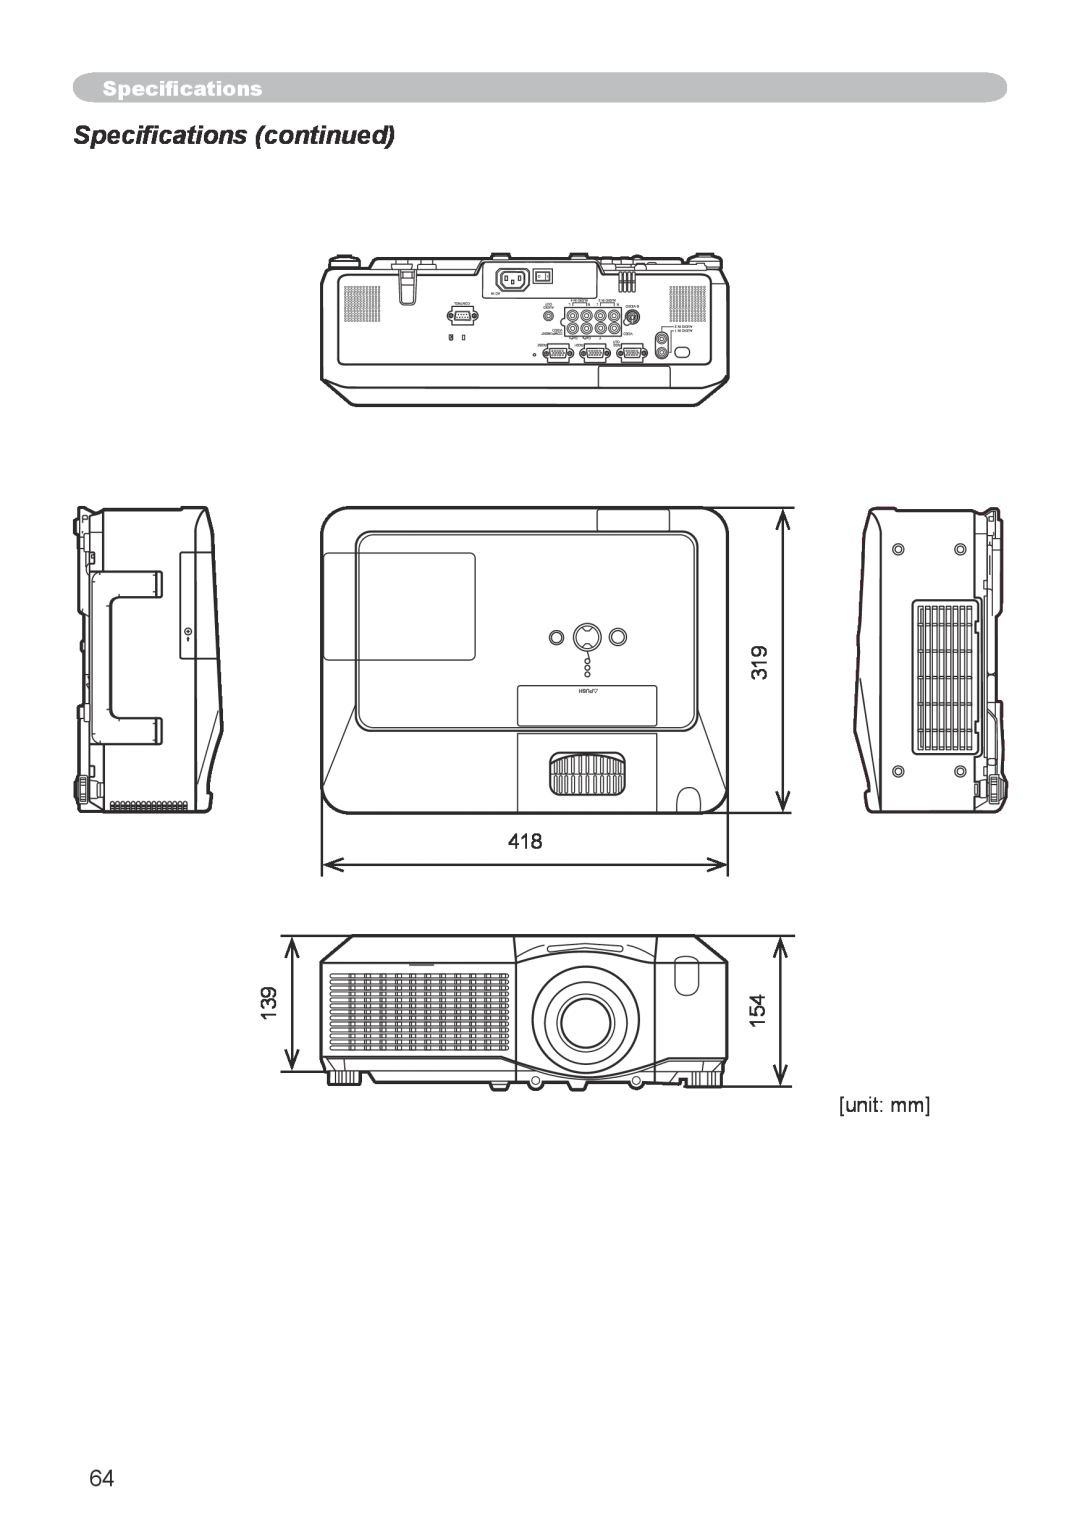 Hitachi CP-X600 user manual Specifications continued, 319 418, unit mm 